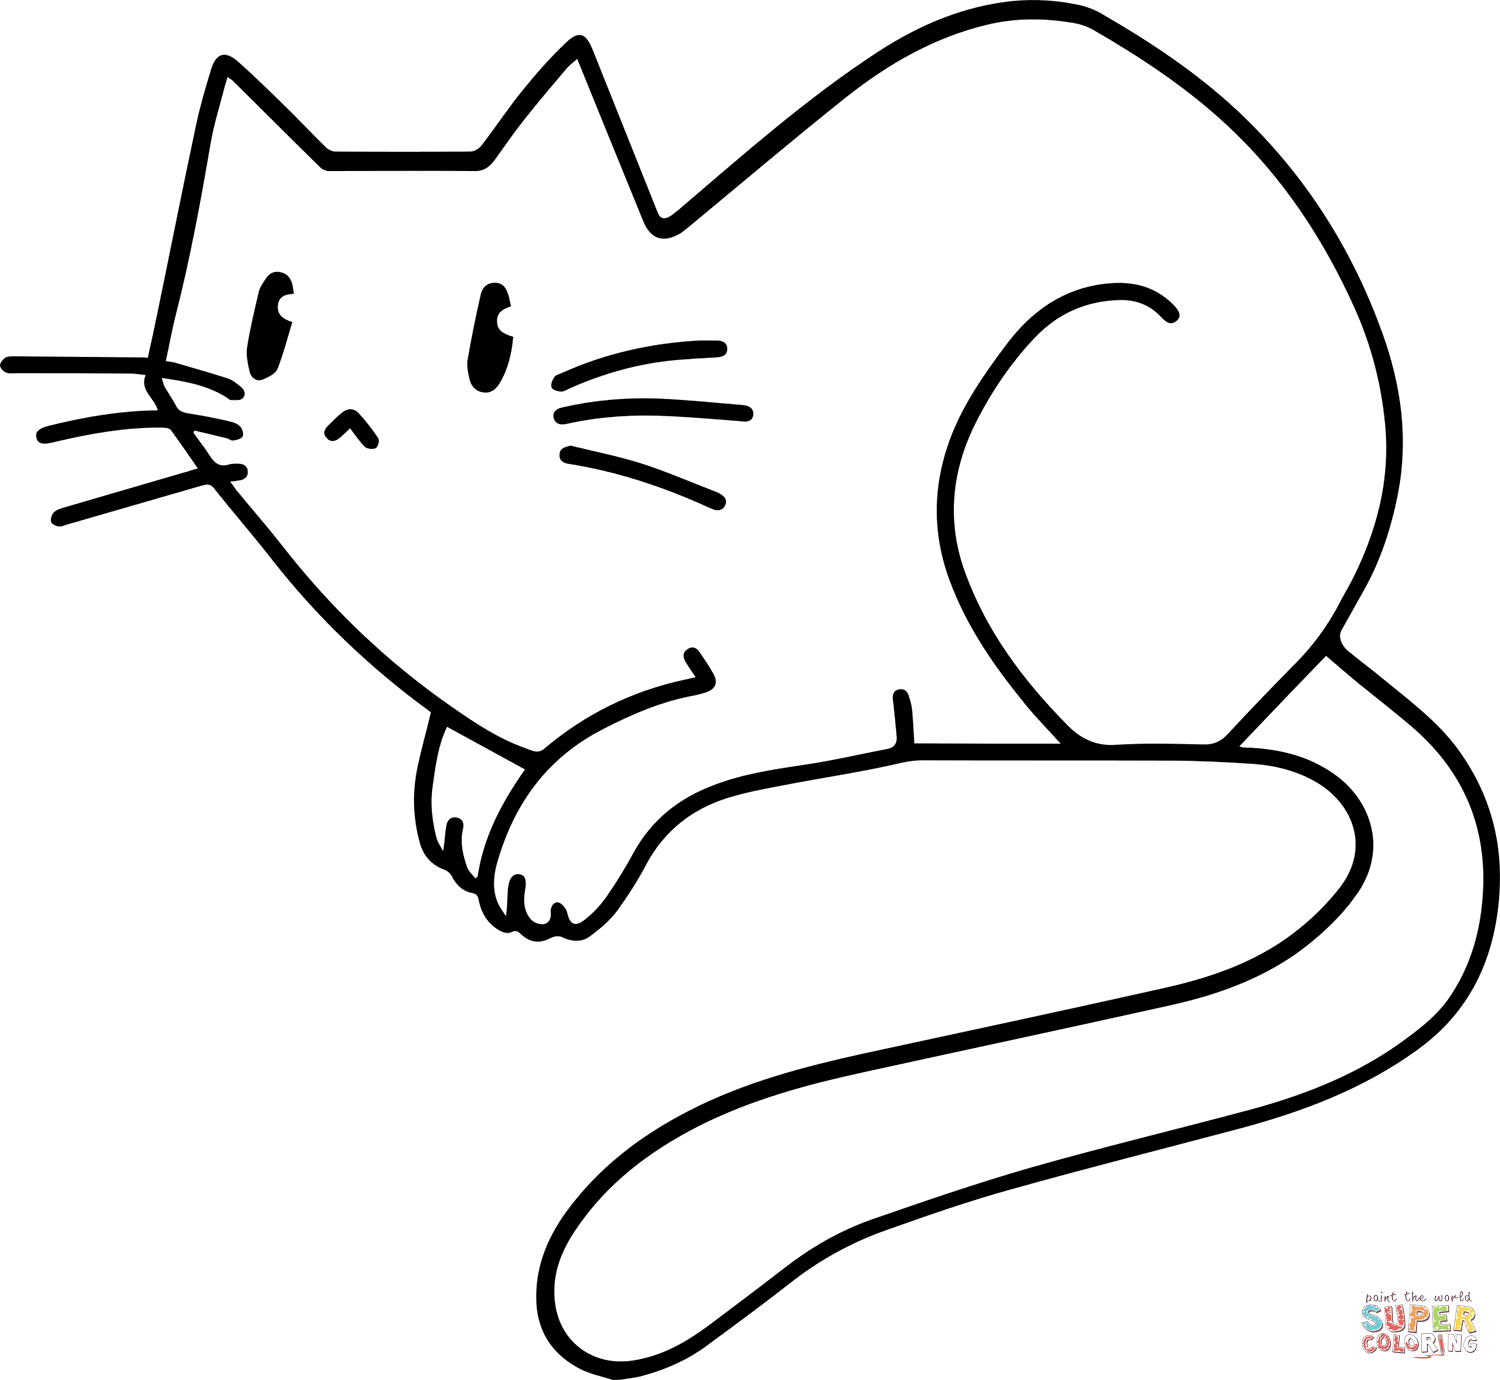 Cartoon cat coloring page free printable coloring pages